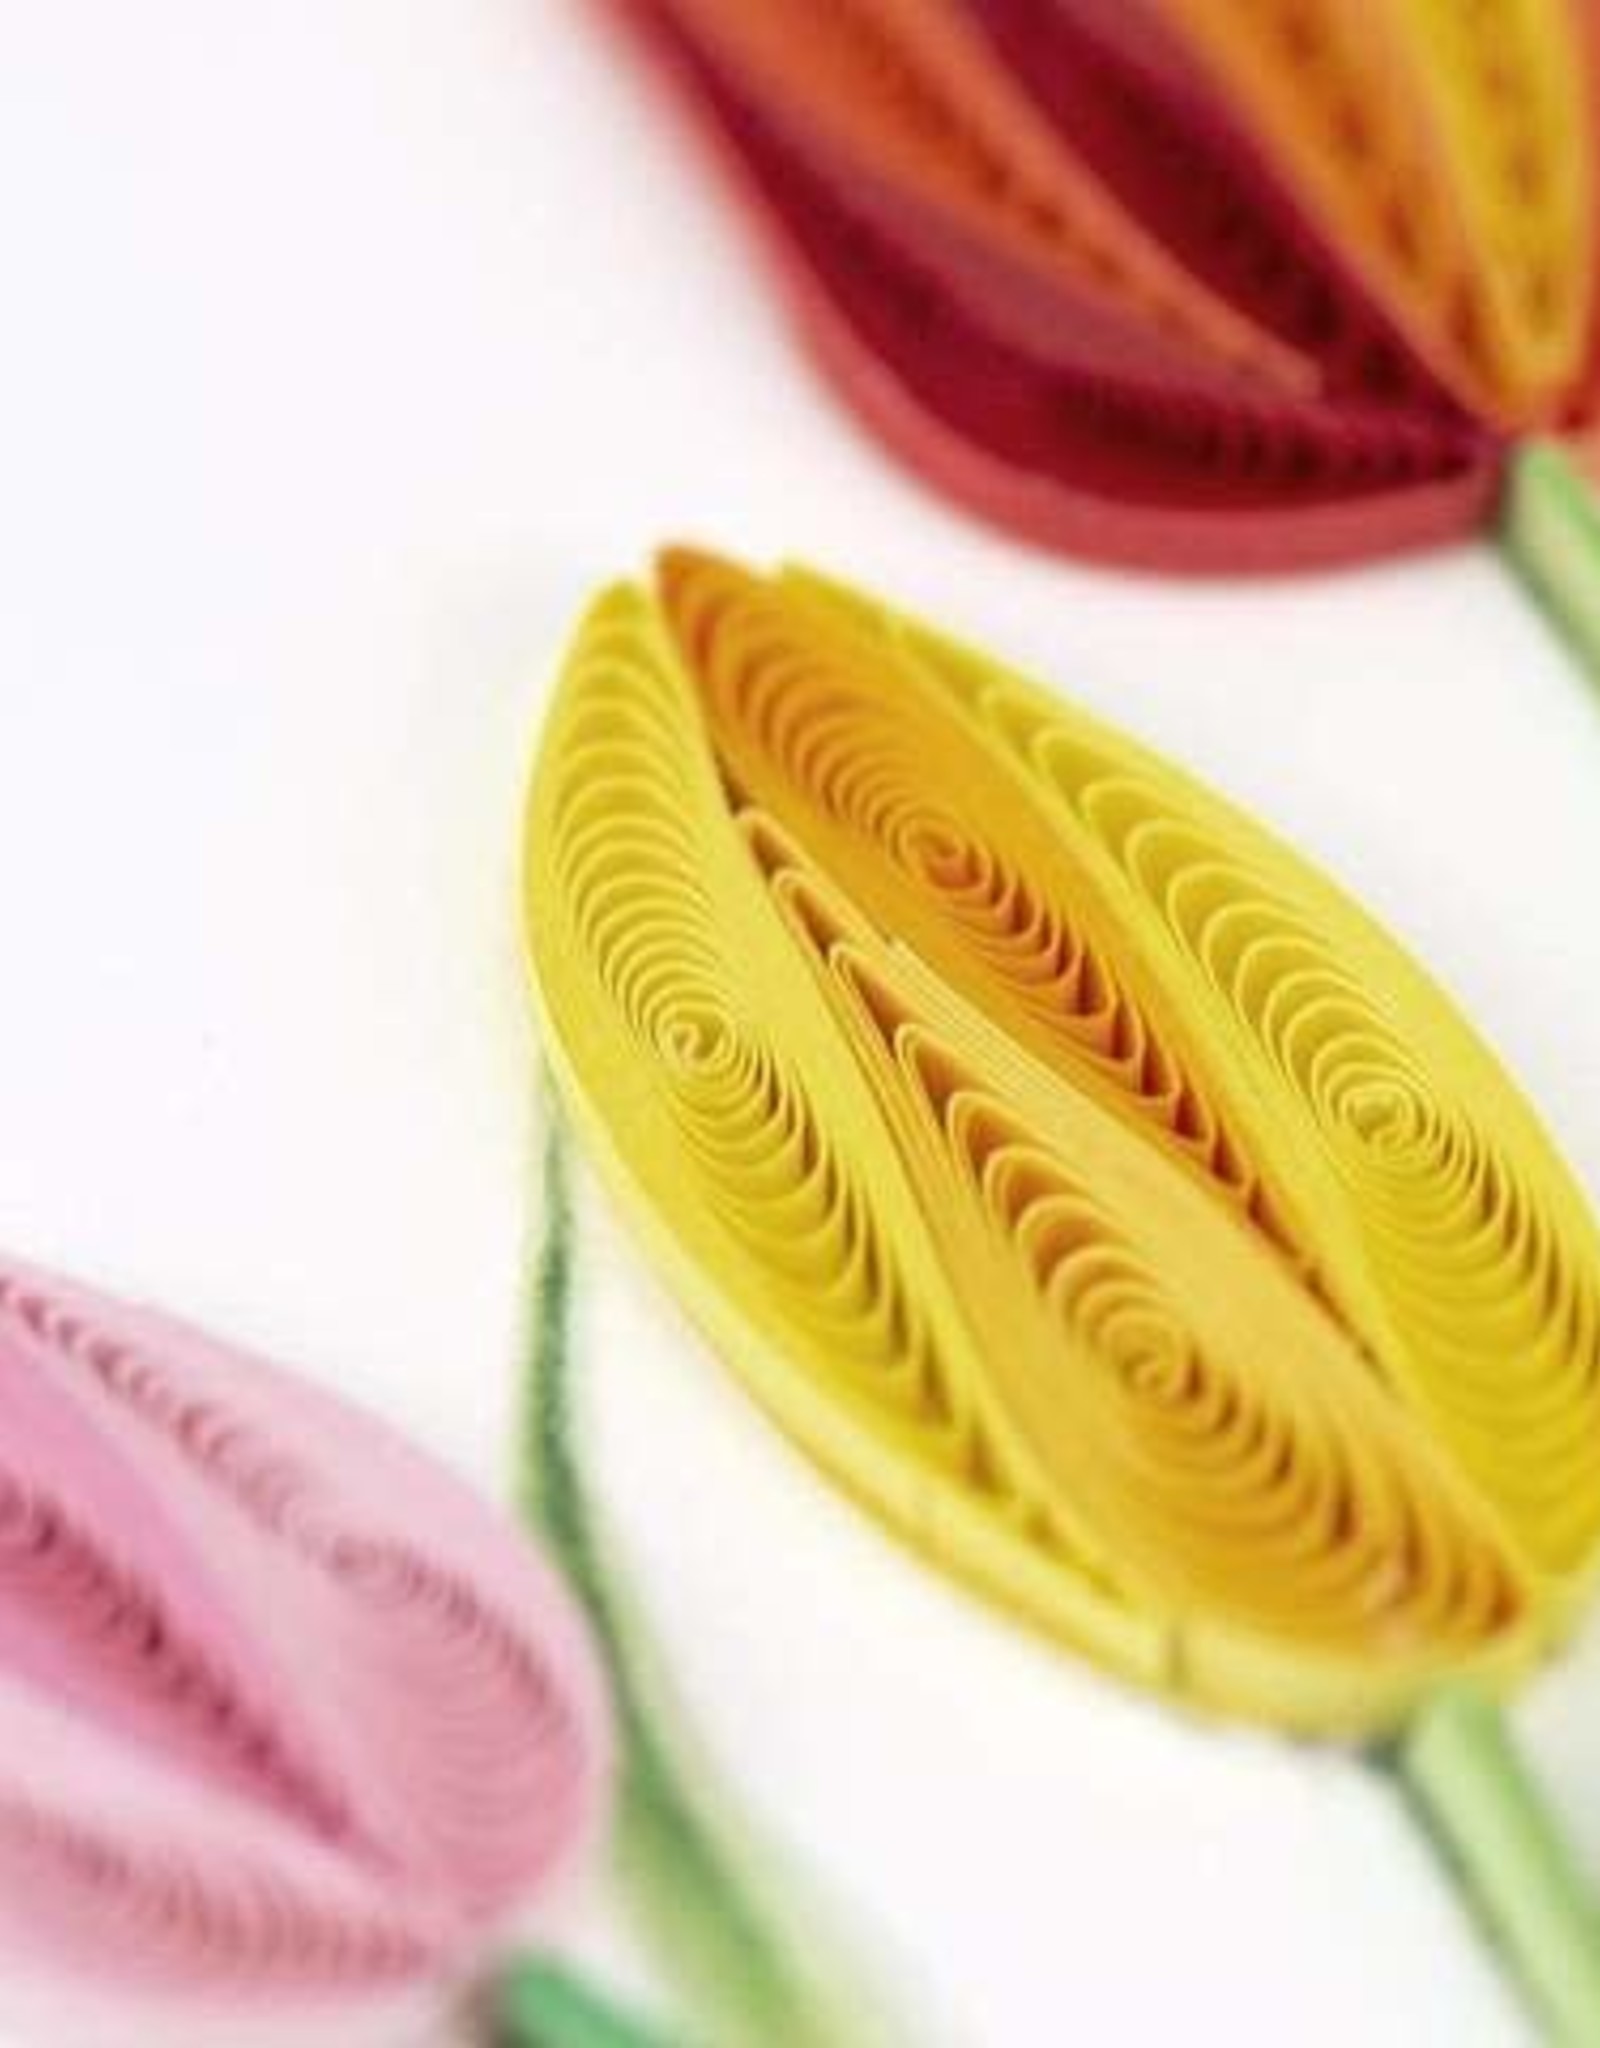 Quilling Card Quilled Colorful Tulips Greeting Card